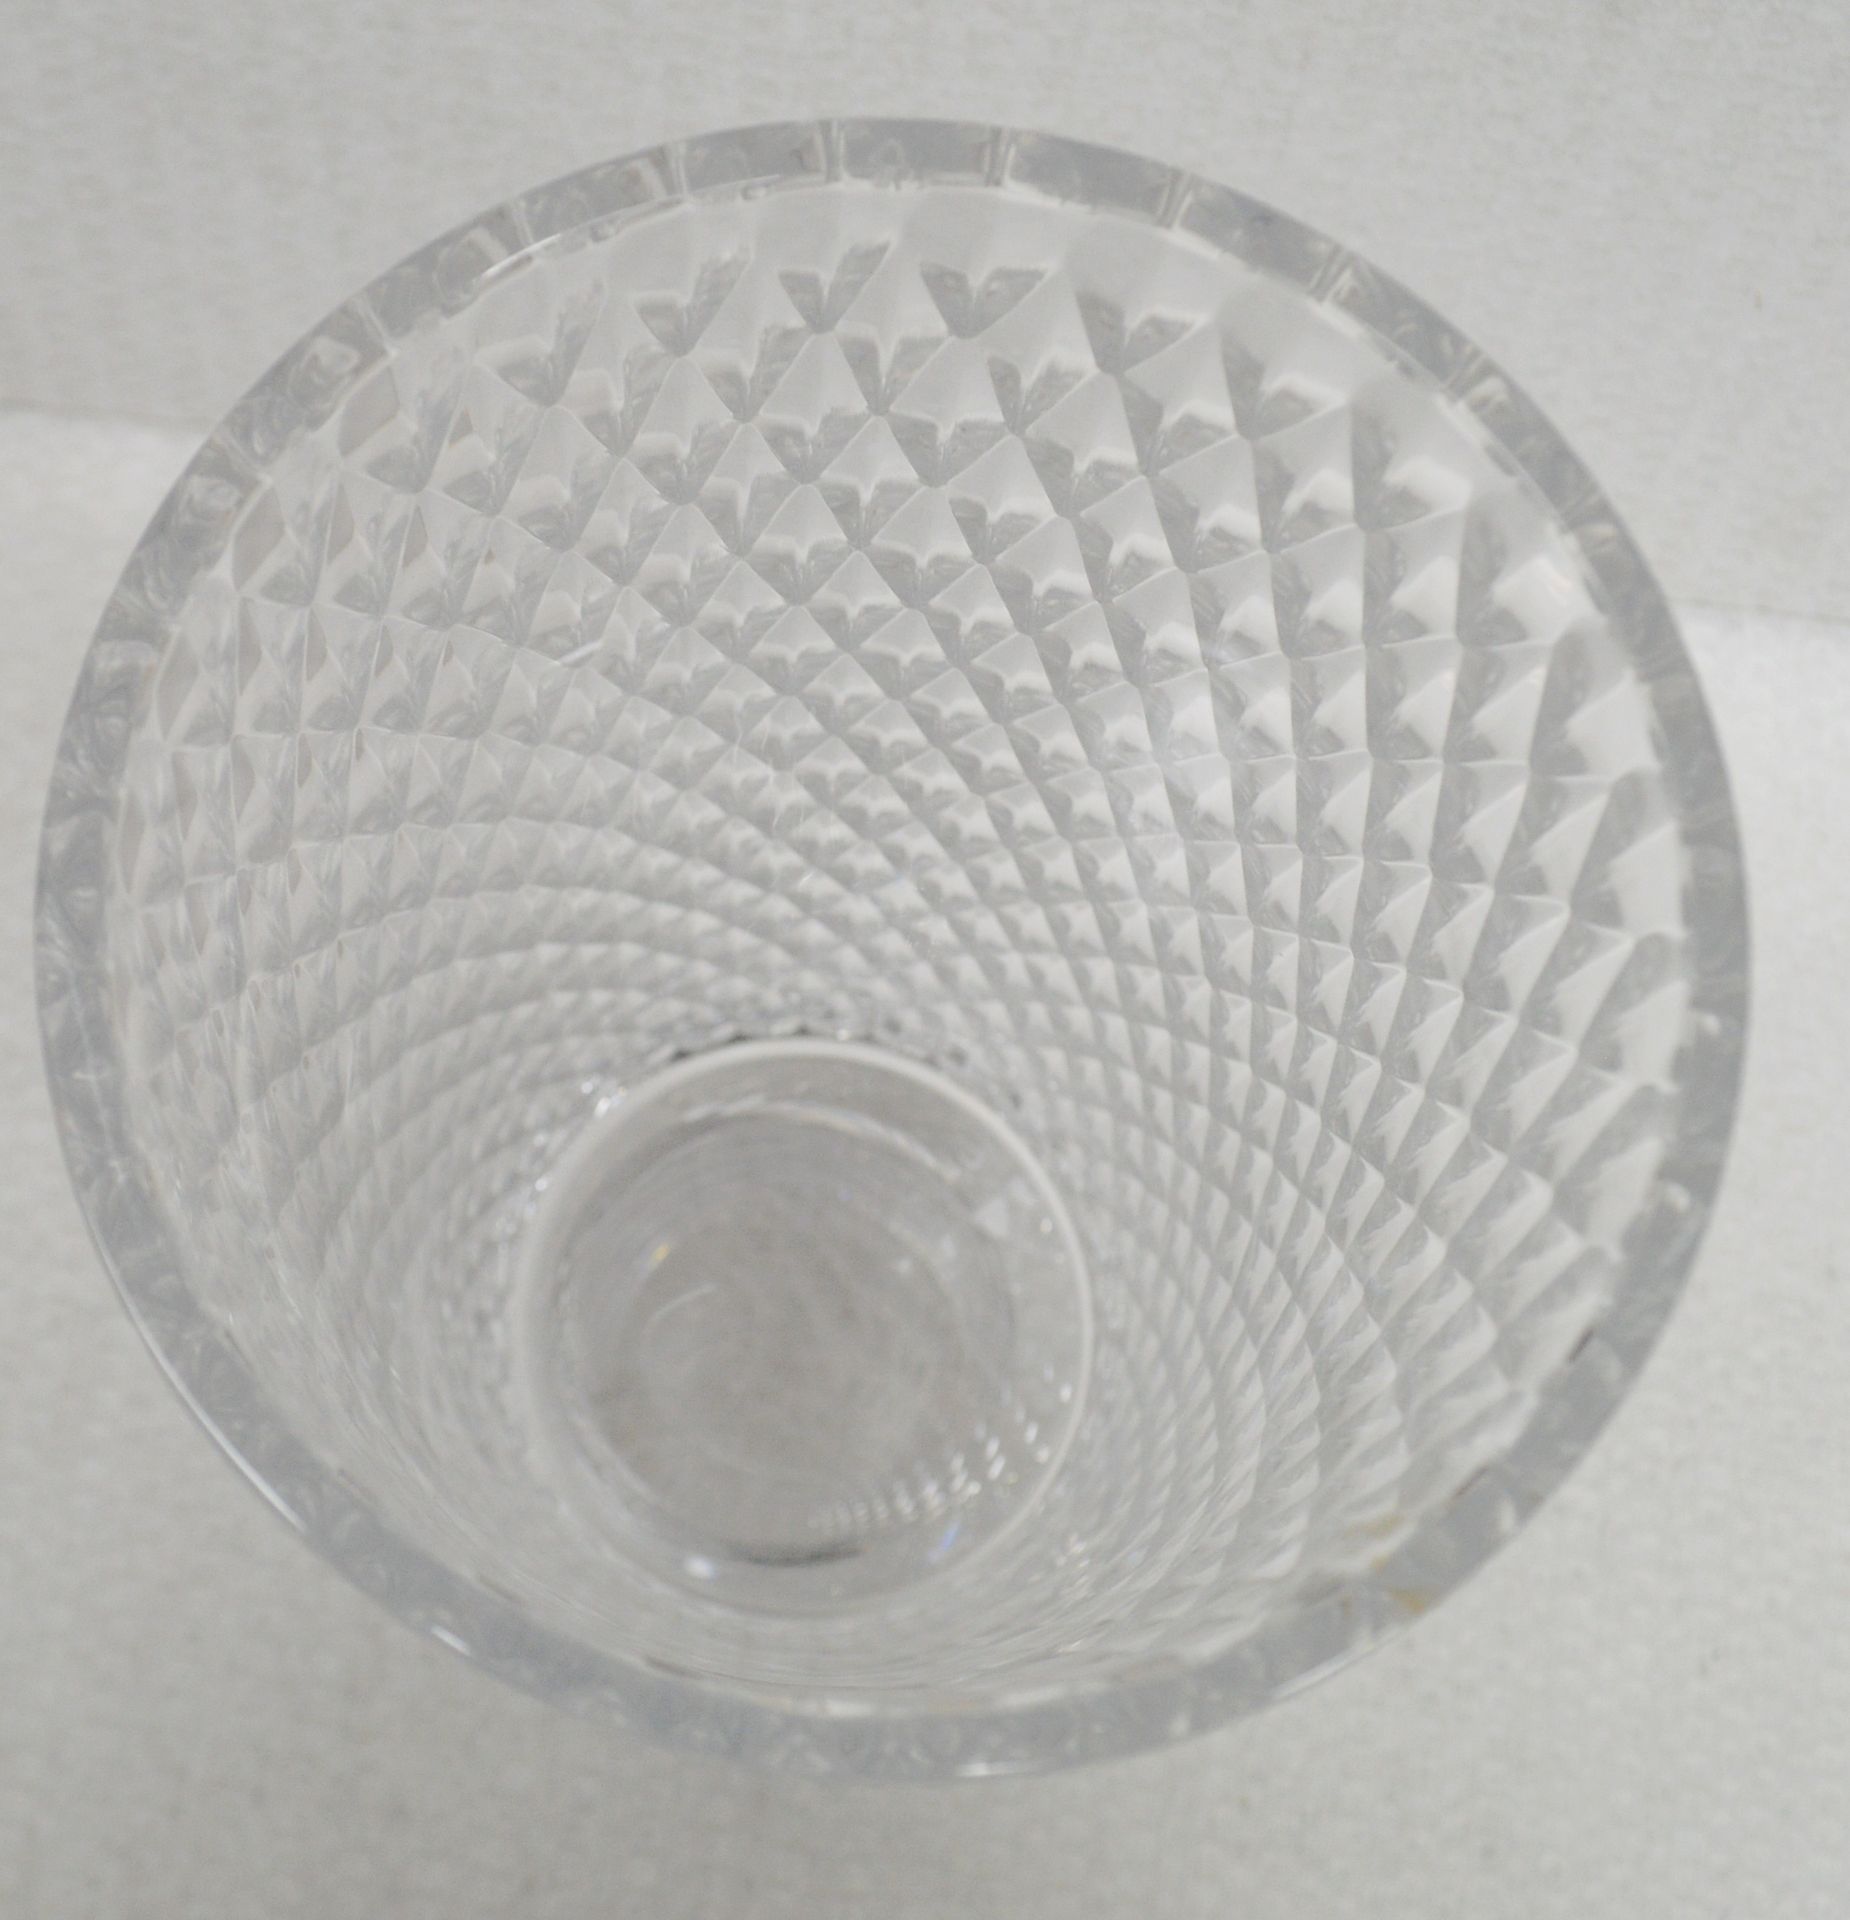 1 x BALDI 'Home Jewels' Italian Hand-crafted Artisan Clear Crystal Vase - Unboxed Ex-display Item - Image 3 of 5